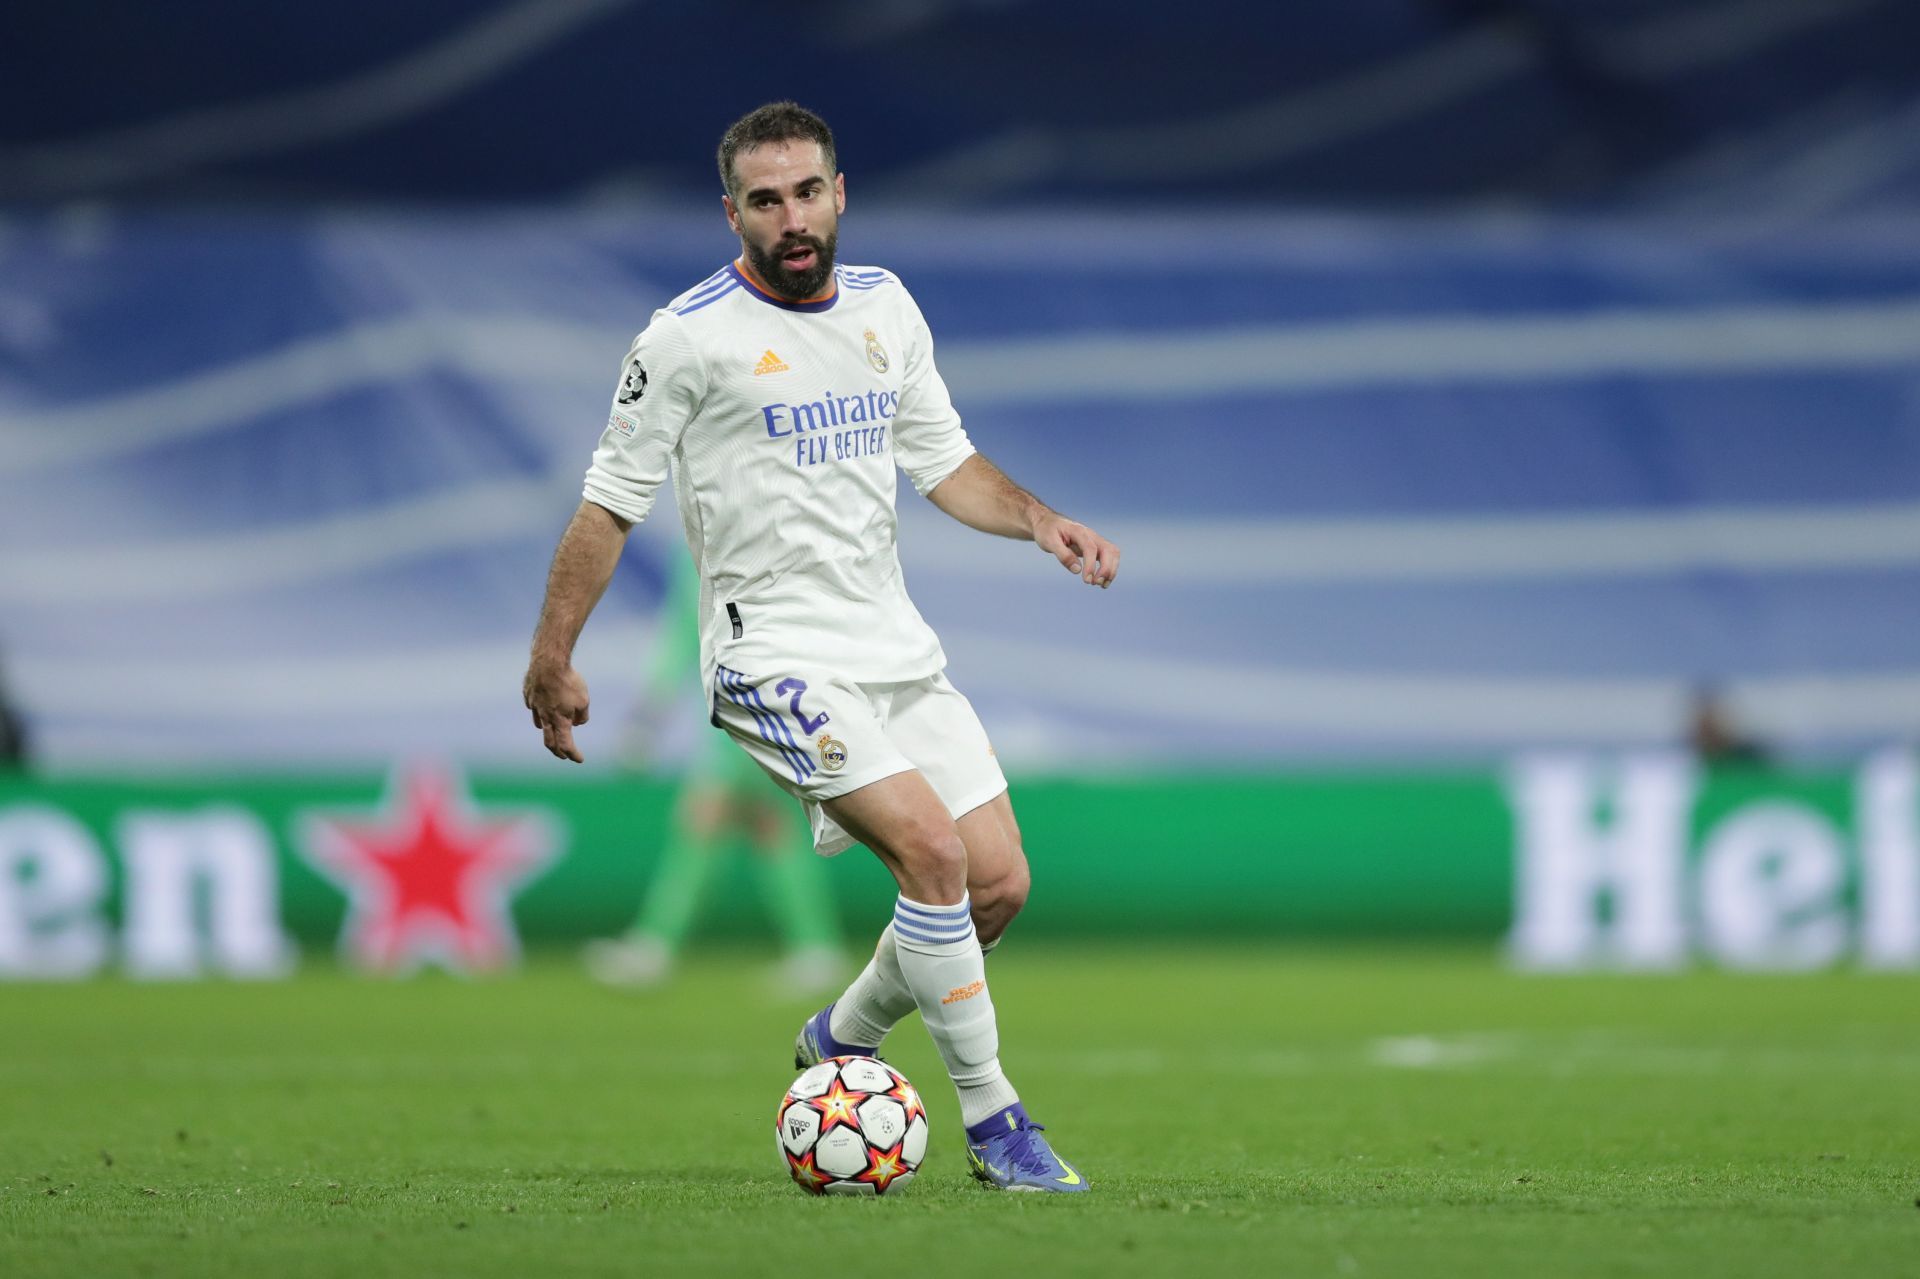 Carvajal has become one of Europe's finest right-backs at Real Madrid.